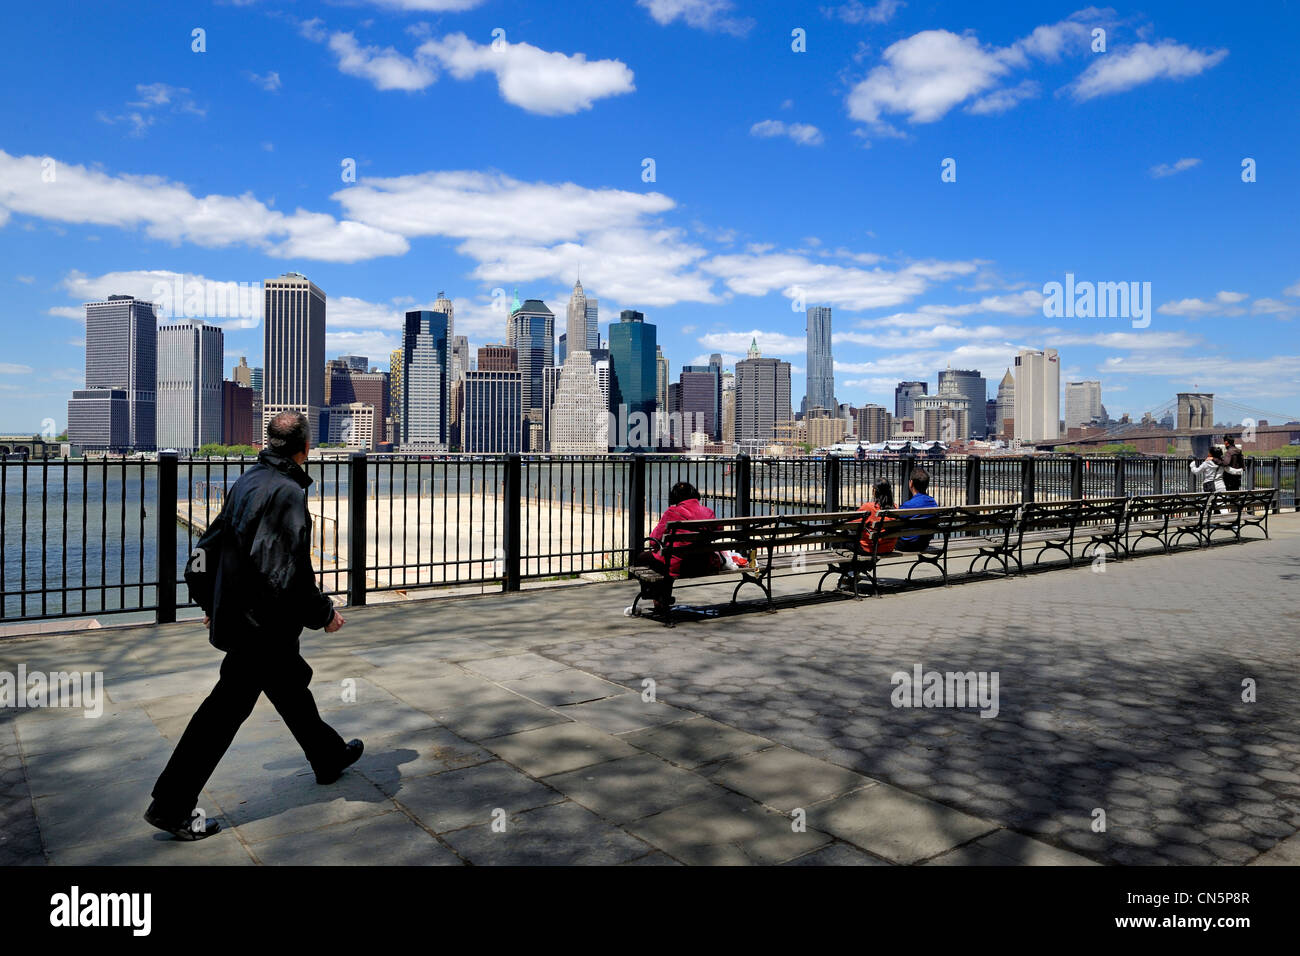 United States, New York City, Downtown Manhattan seen from the Promenade in Brooklyn Stock Photo